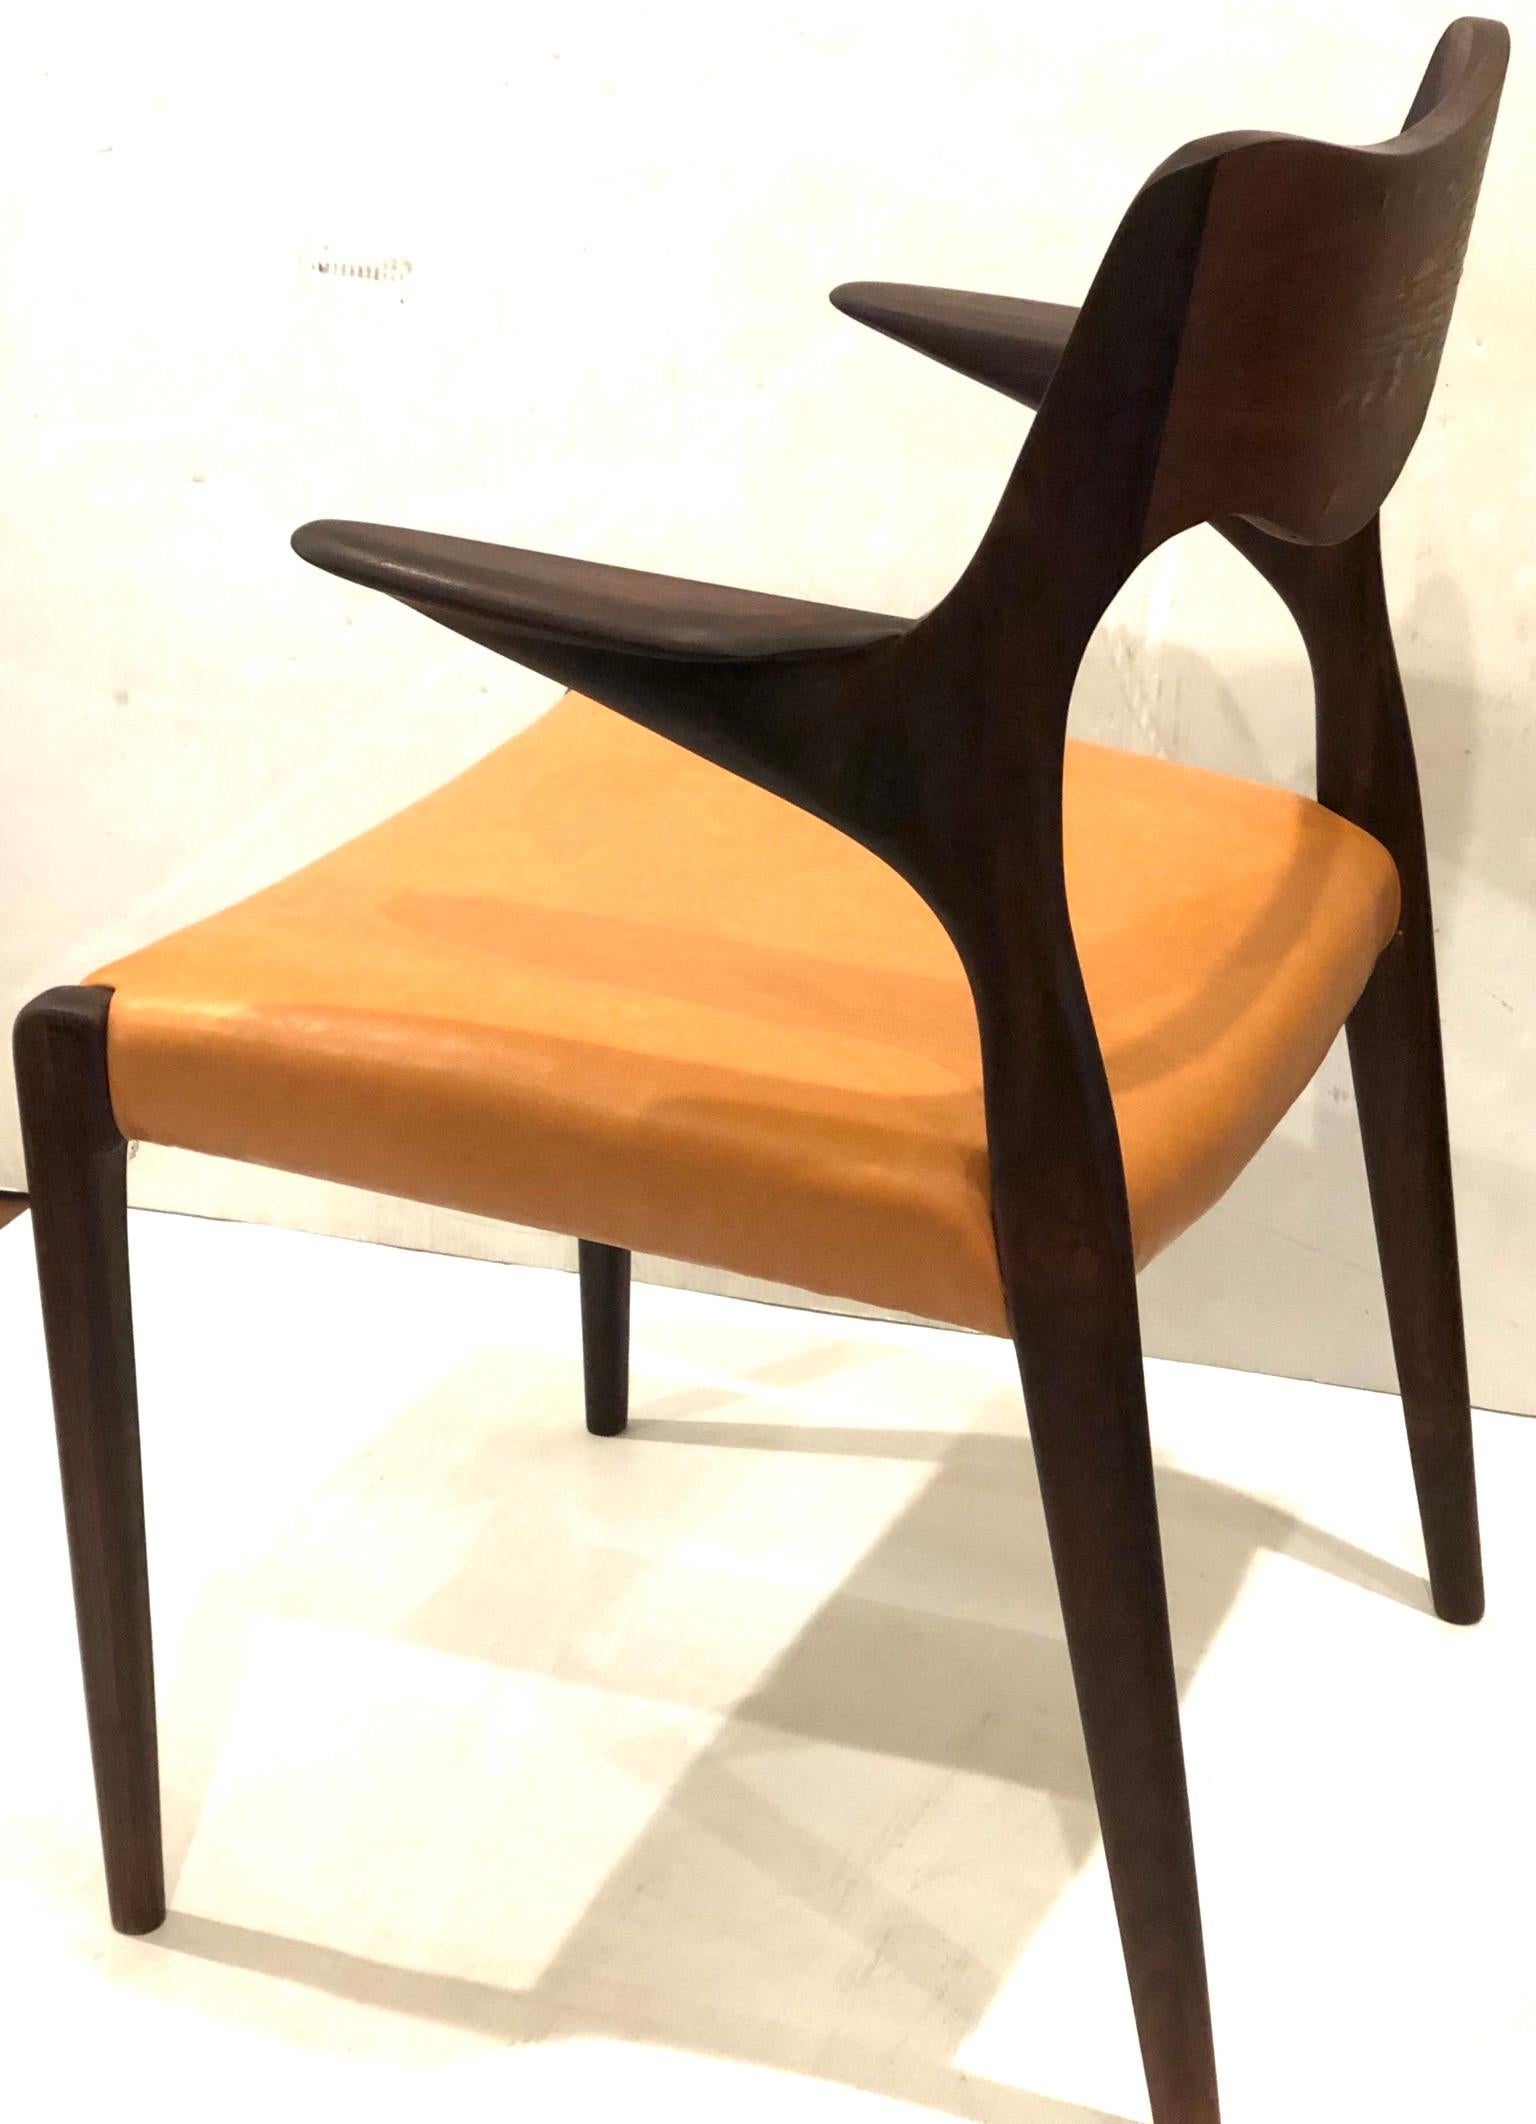 Beautiful single sculpted armchair, in rosewood frame and caramel color Naugahyde seat great design beautiful lines, solid and sturdy designed by Niels Moller, circa 1955. The chair its in good condition solid and sturdy with some bubbles or